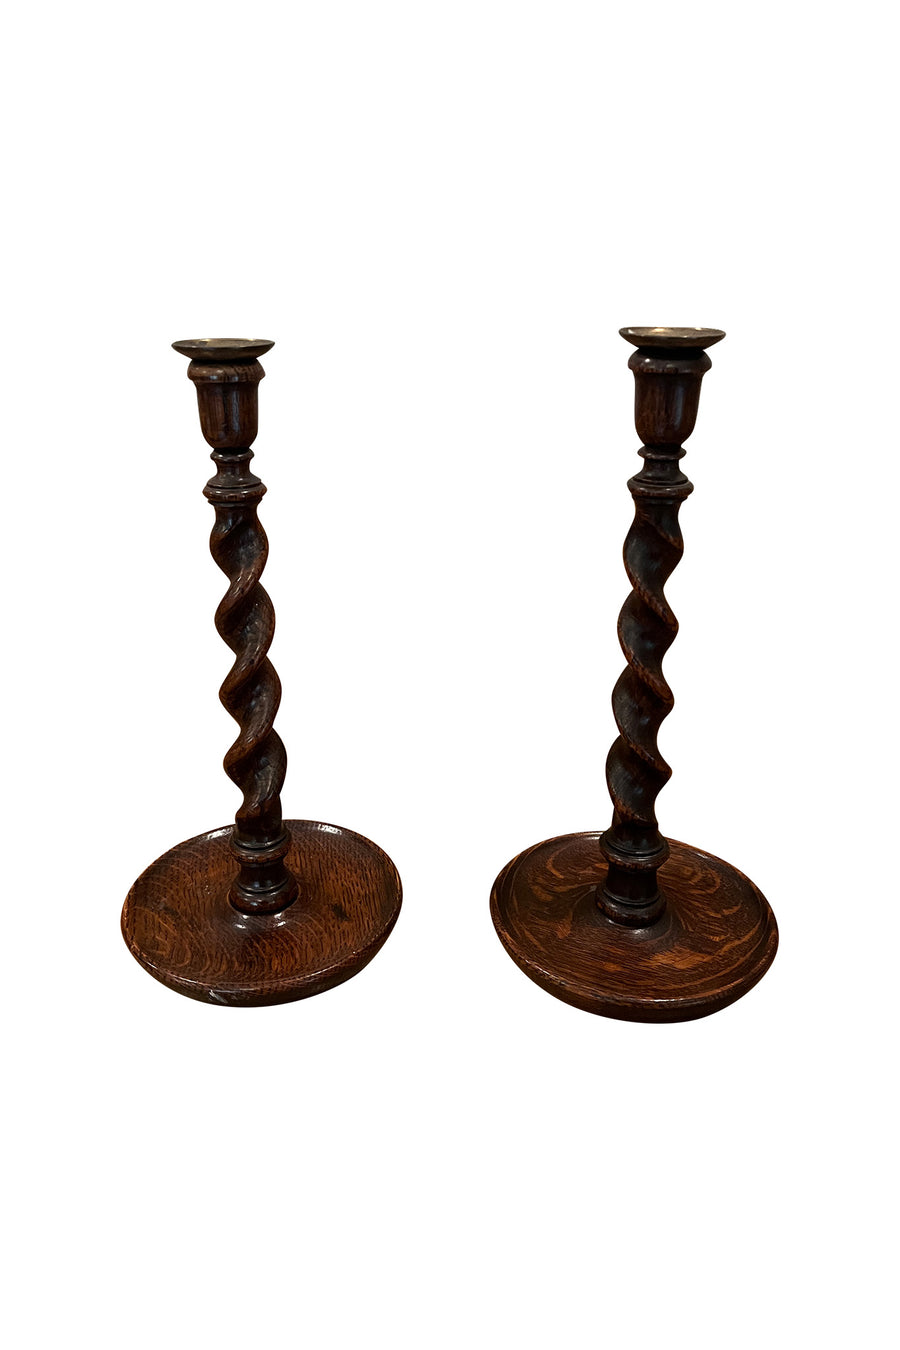 Copy of Pair of Turned Oak Candlesticks with Brass Detail